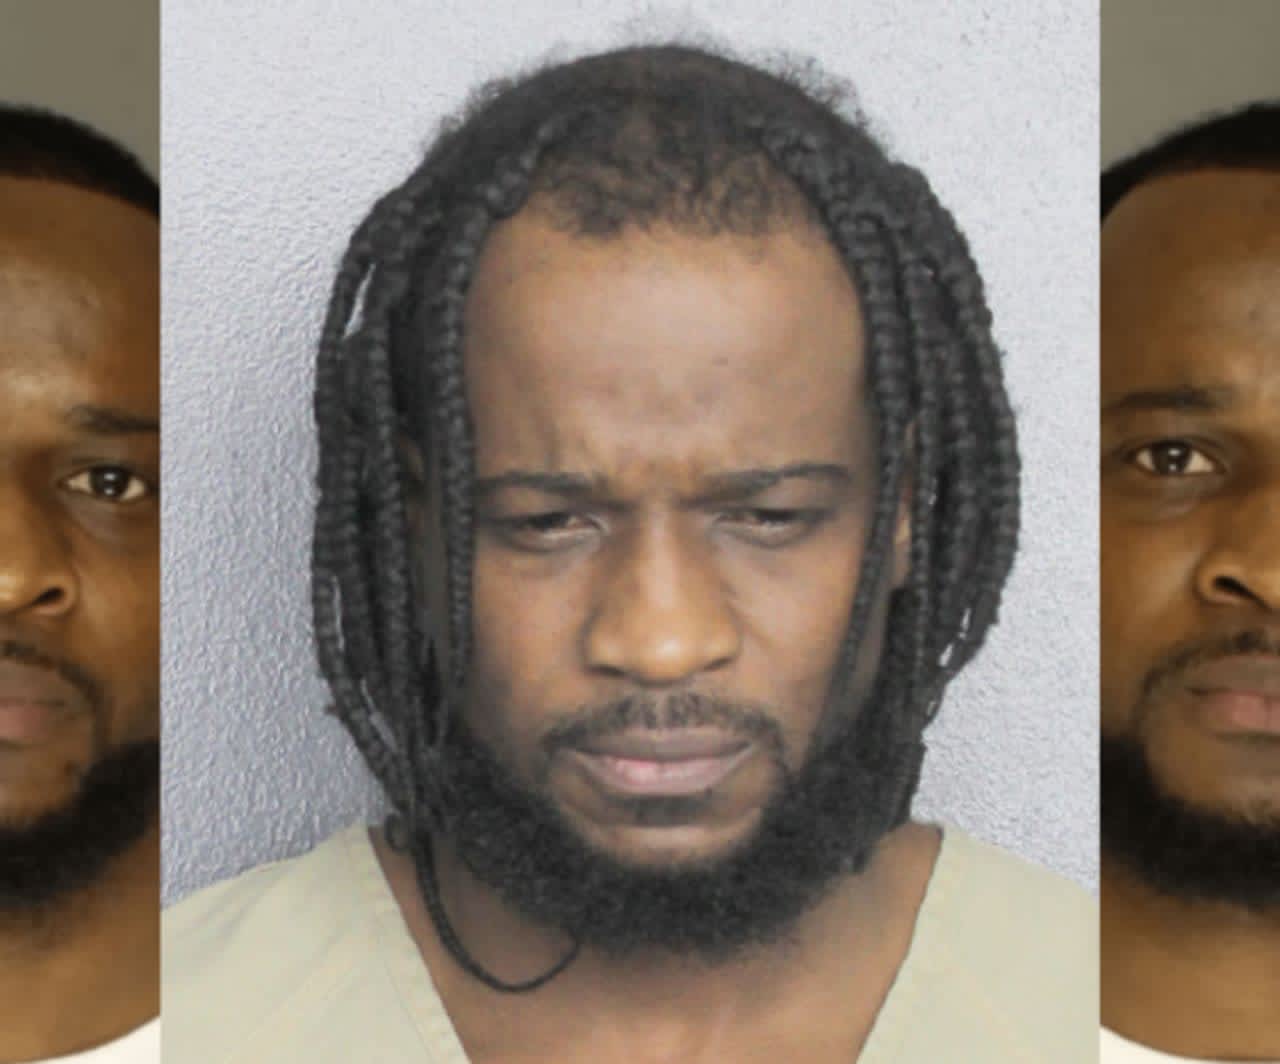 Michael Anthony Baltimore on his wanted poster (left/right) and when he was arrested in Flordia (center).